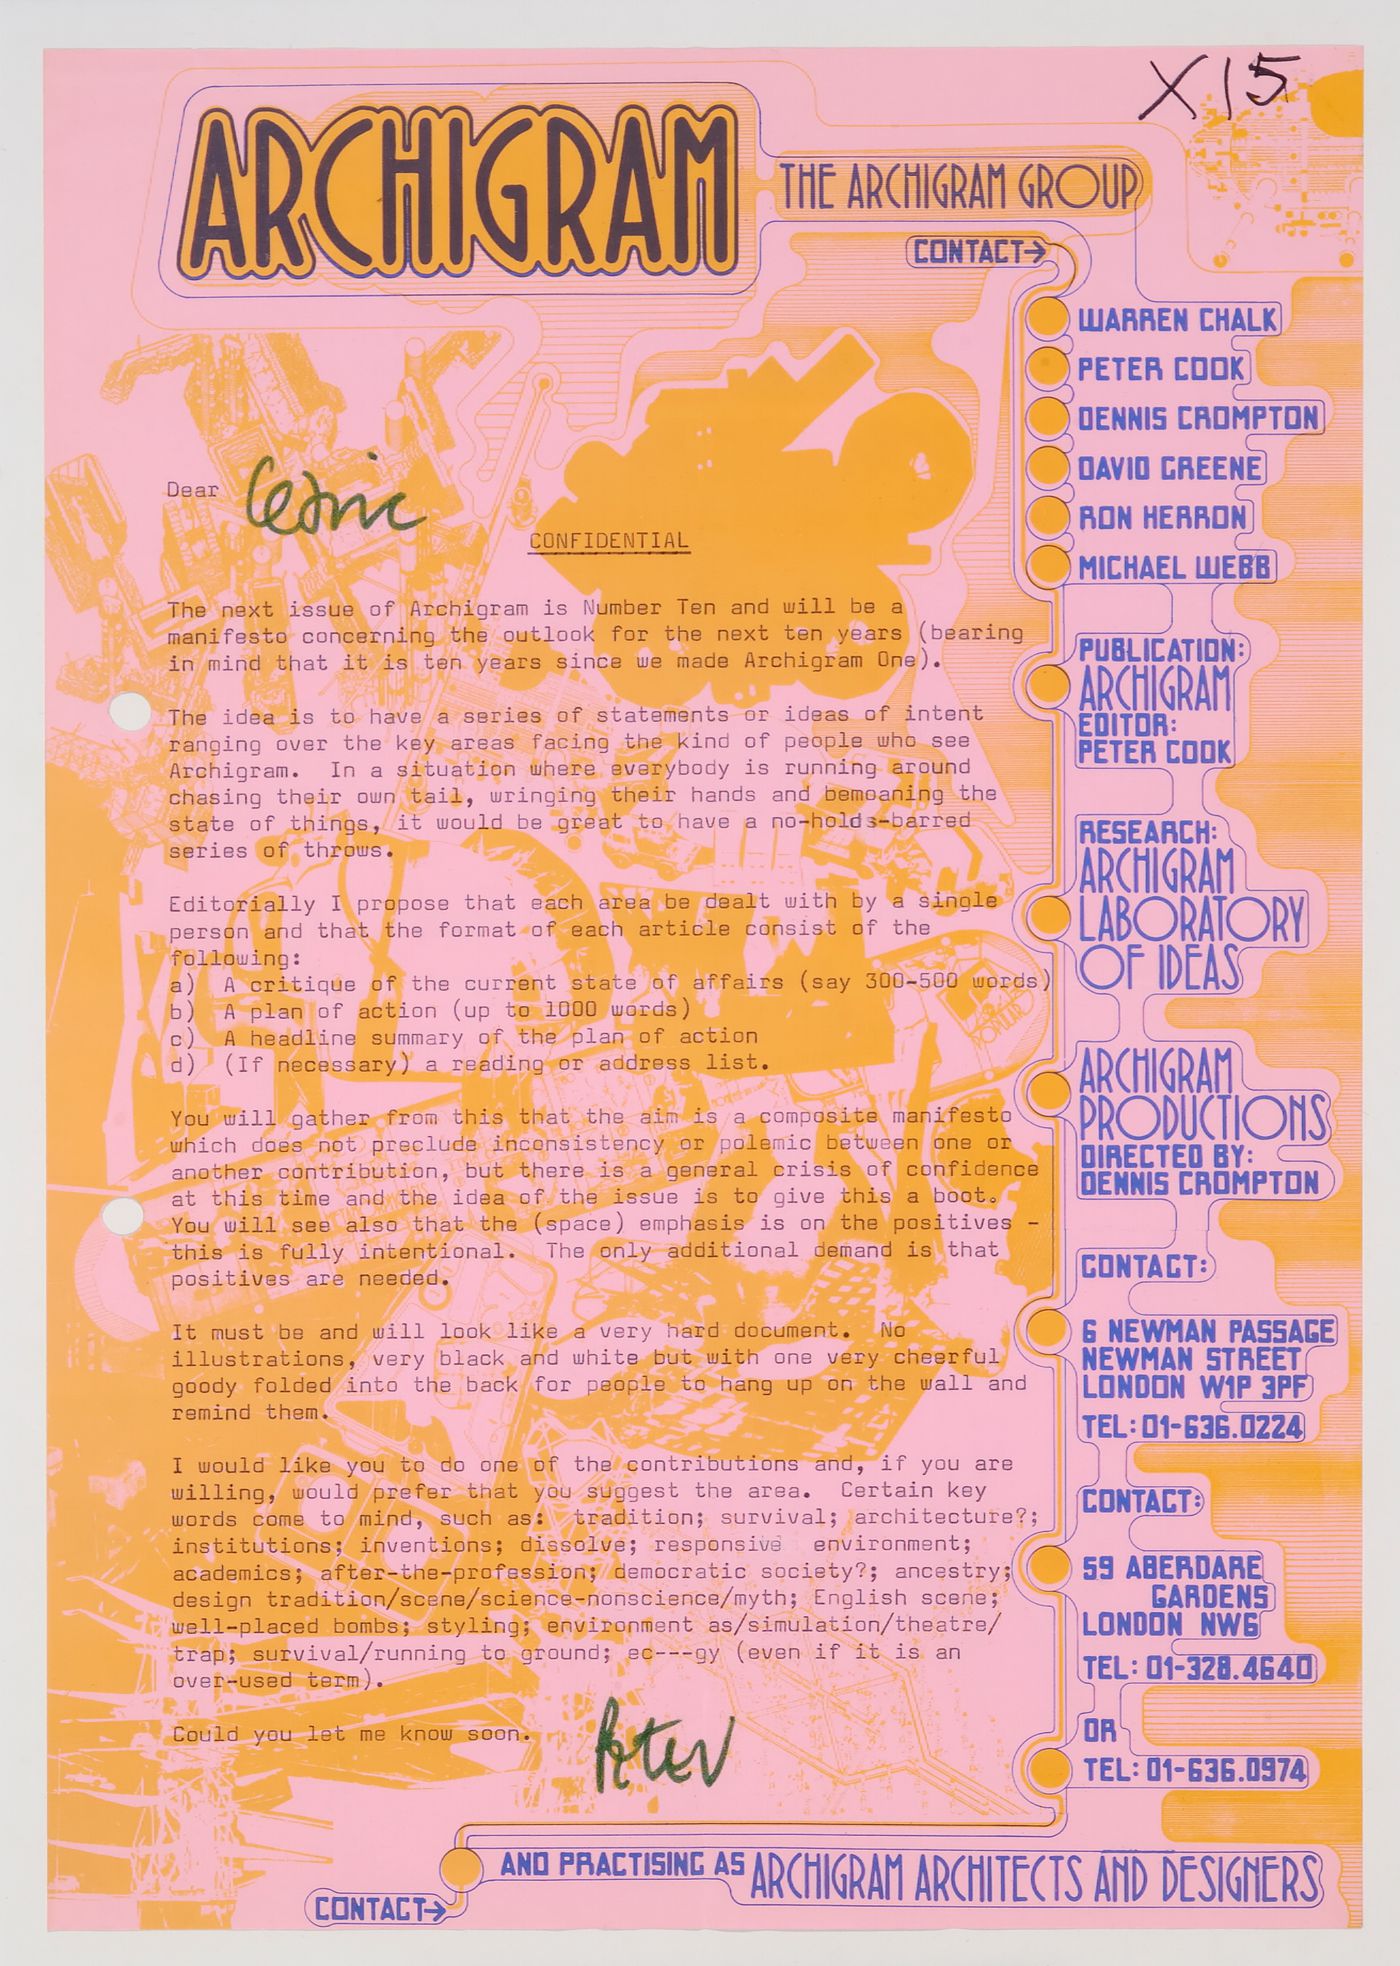 Letter from Peter Cook inviting Cedric Price to contribute to Archigram Ten